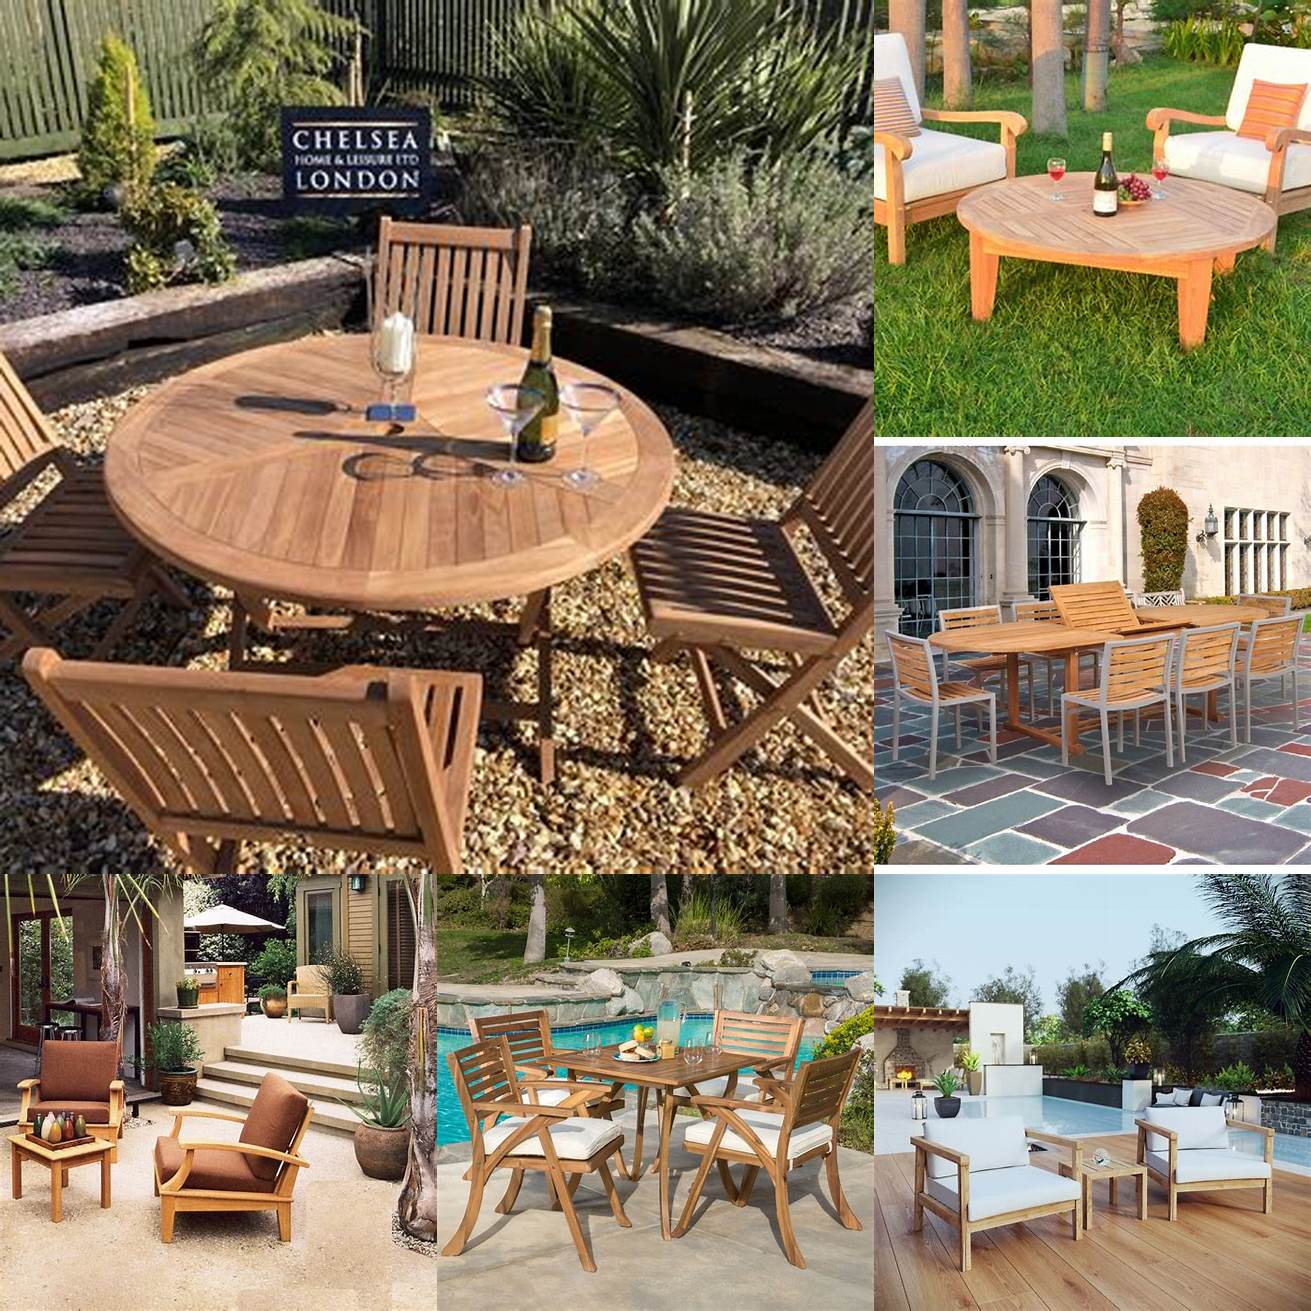 Teak outdoor furniture in a factory setting